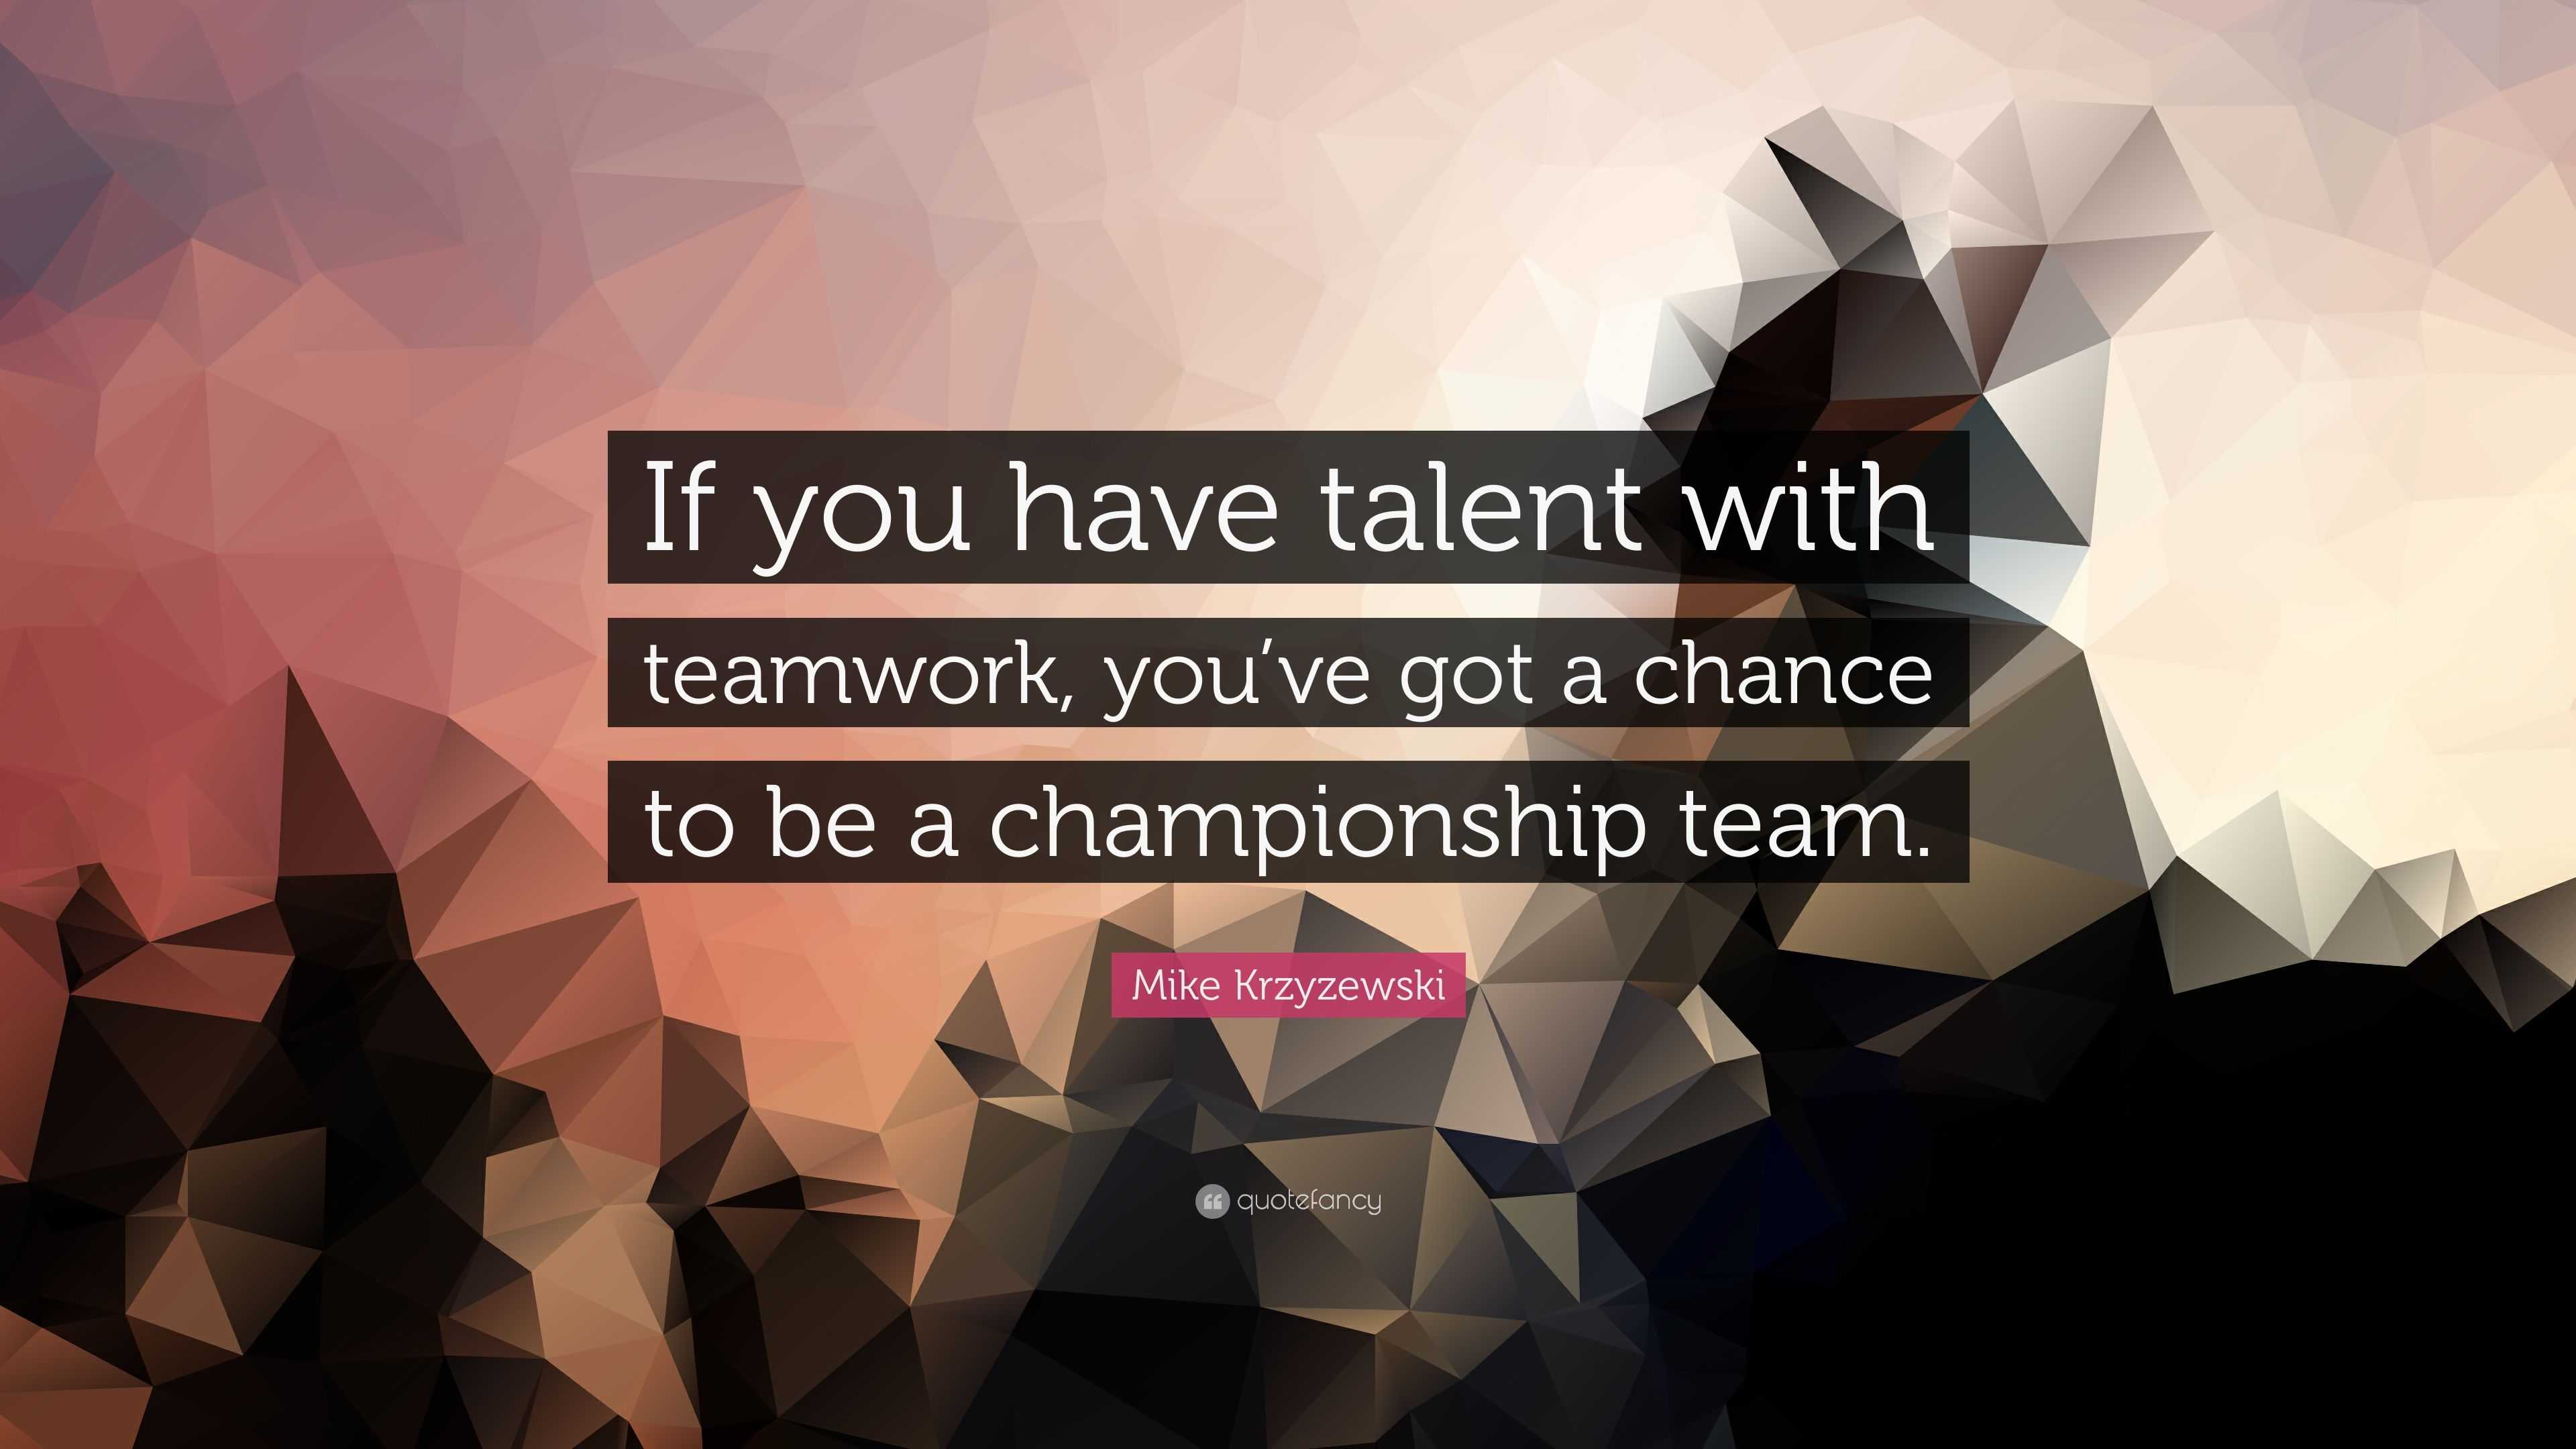 Mike Krzyzewski Quote: “If you have talent with teamwork, you’ve got a ...